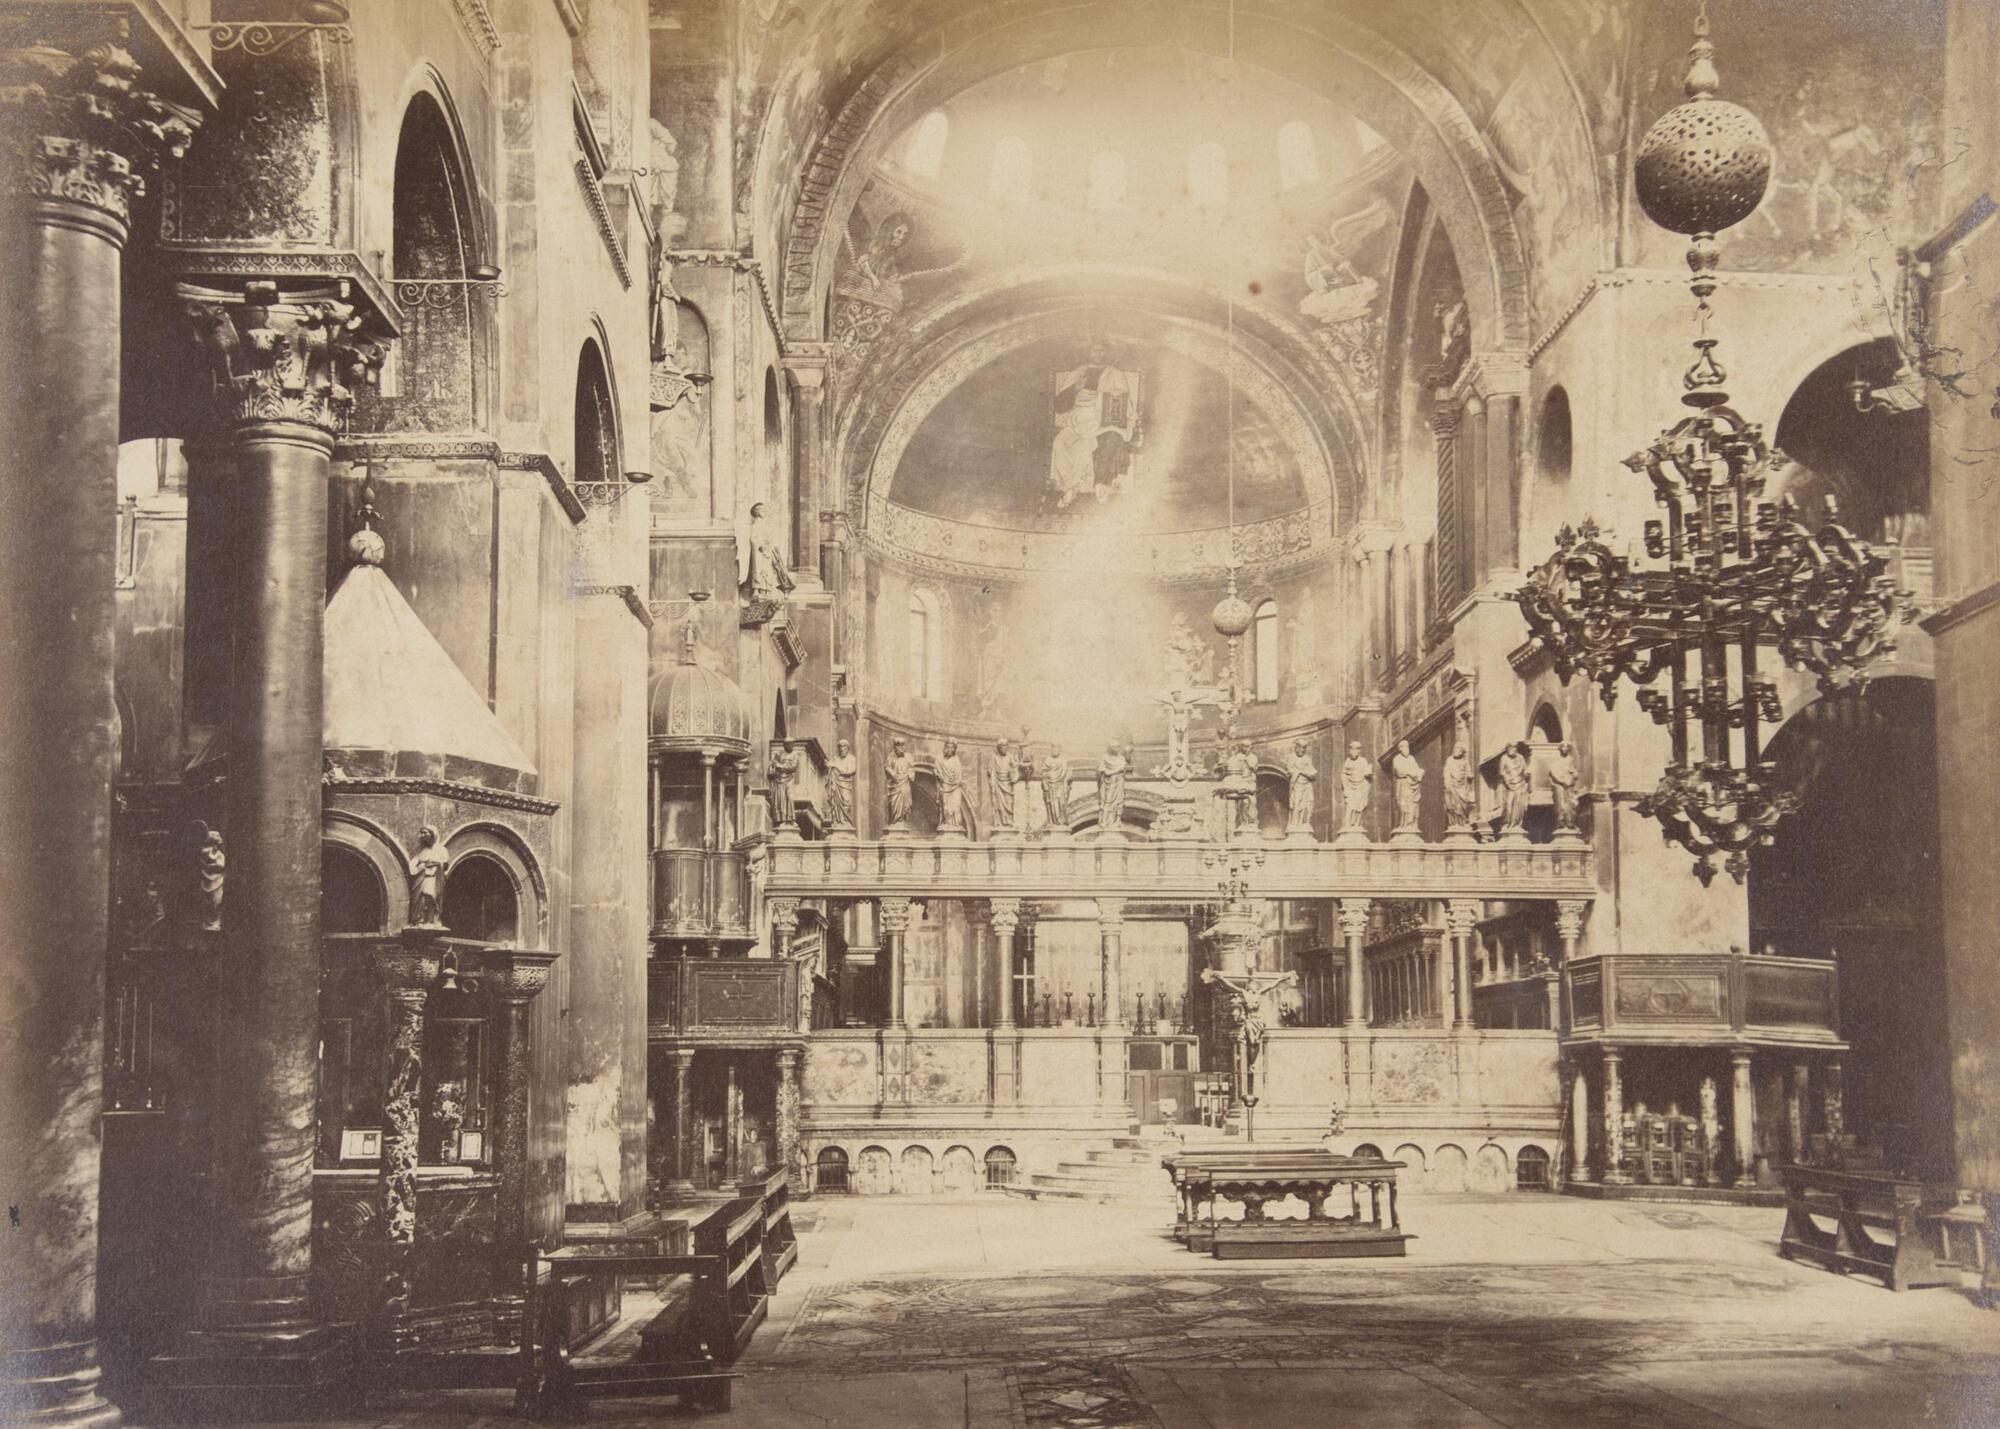 This photograph depicts a view of a church interior looking towards the high altar. In the walls and dome of the chapel are windows through which sunlight shines.